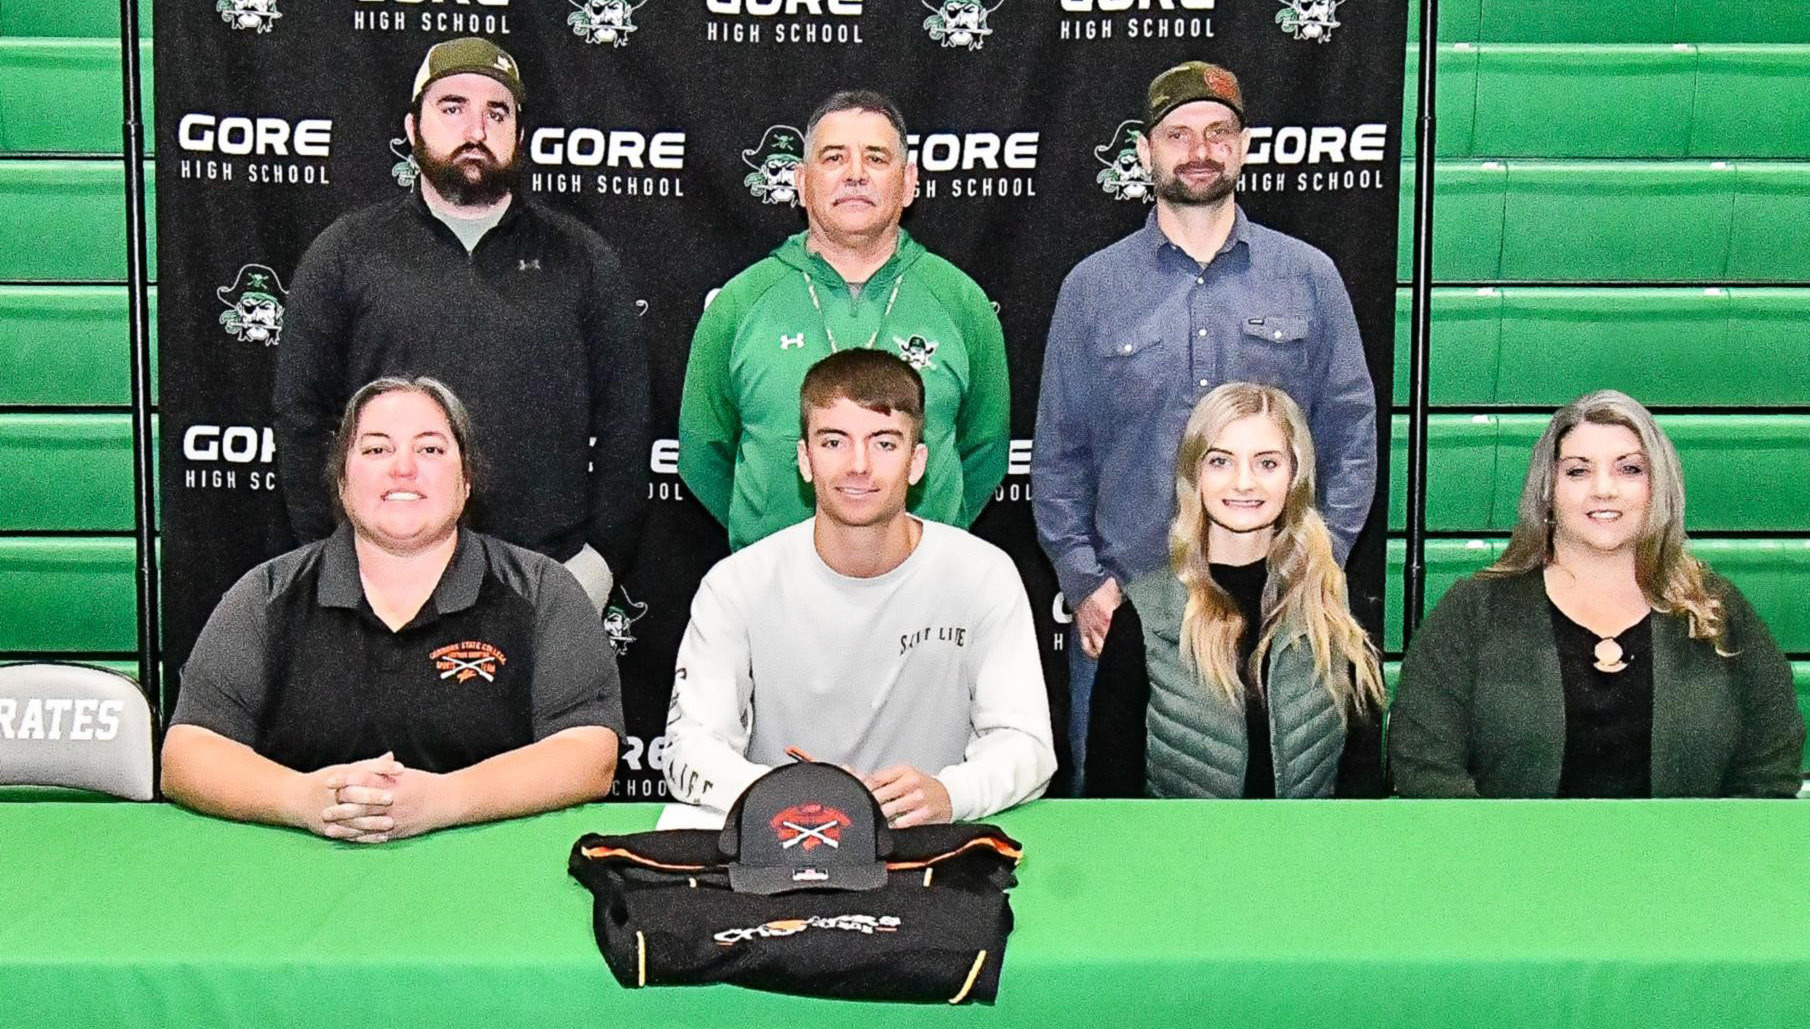 Blane Barnes signed a letter of intent Tuesday to continue his education at Connors State College, competing on the shotgun shooting team. On hand for the signing were (front, from left) CSC shooting coach Sierra Walker, Blane Barnes, LeeAnna Barnes, Sharlene Barnes, (back) Jonathan Lawrence, Martin Lincoln and Bucky Barnes. JIM CAMERON • TIMES